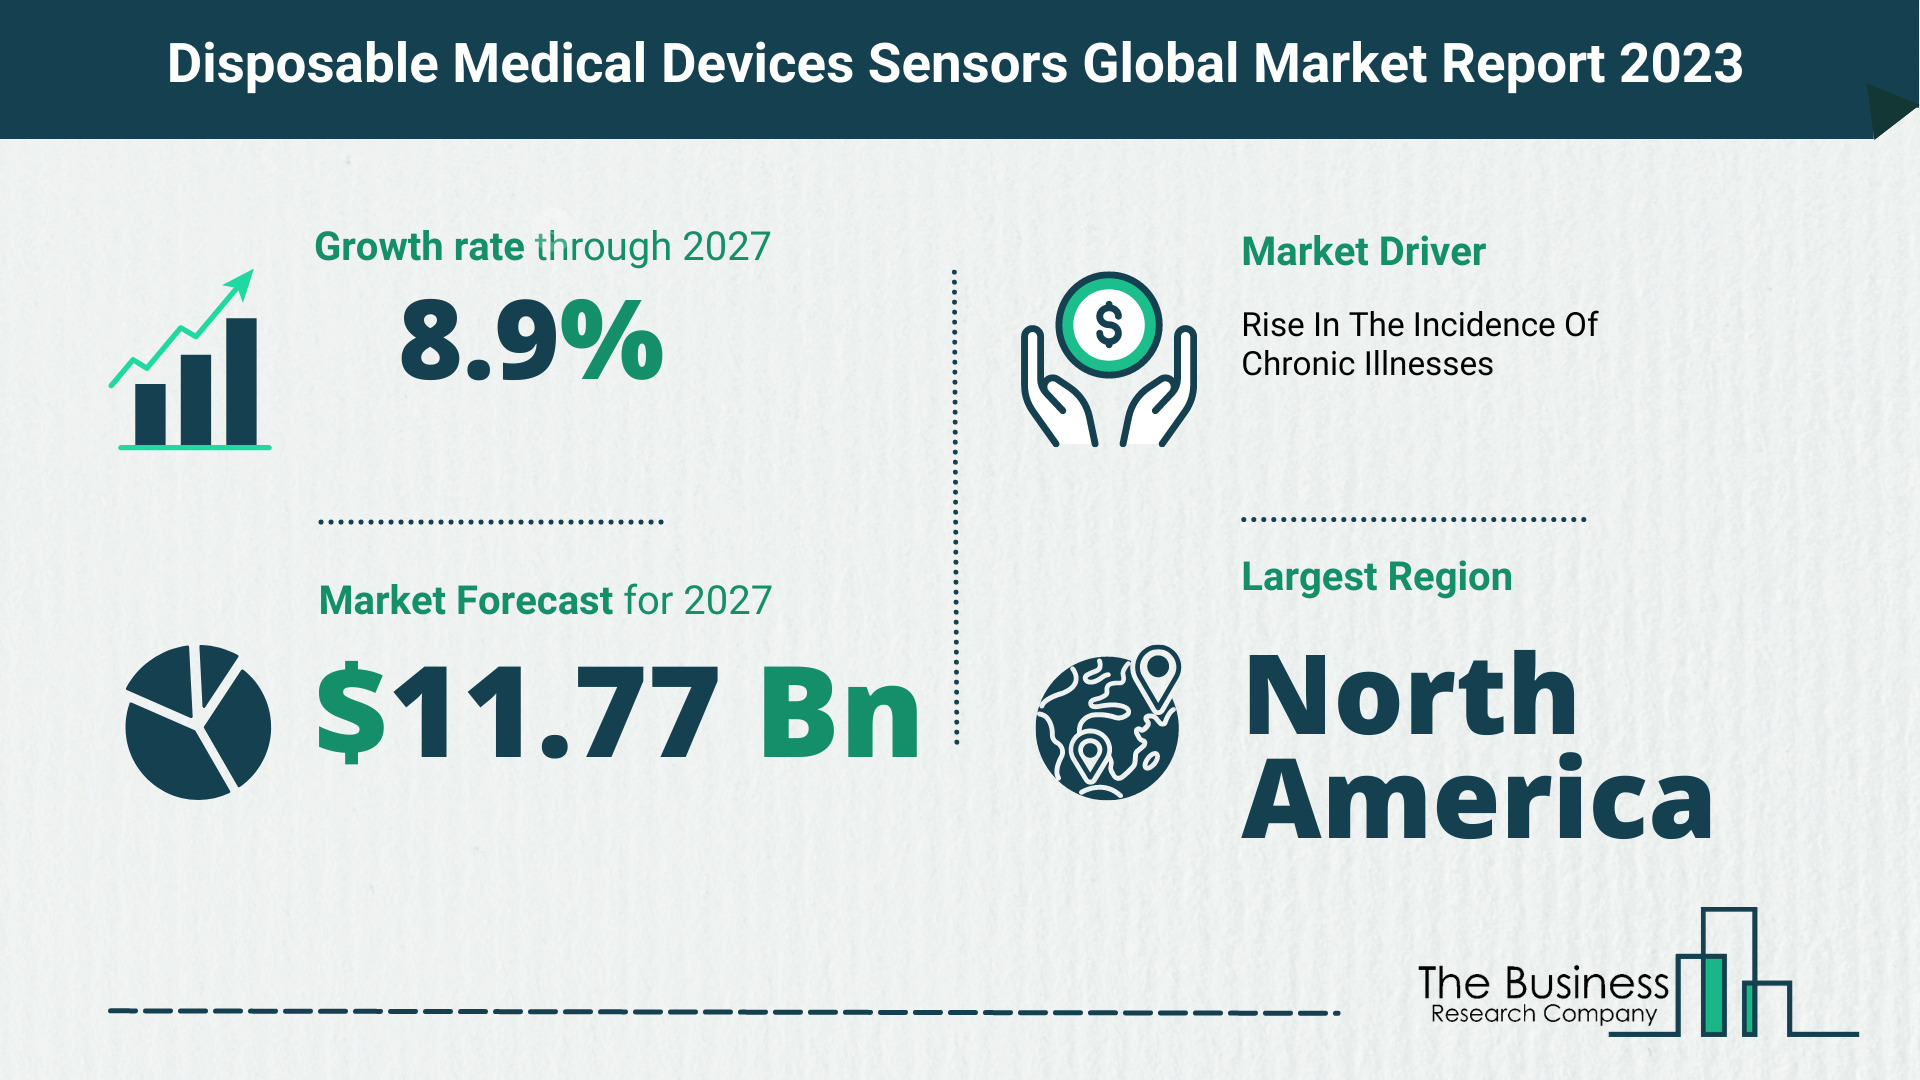 What Will The Disposable Medical Devices Sensors Market Look Like In 2023?